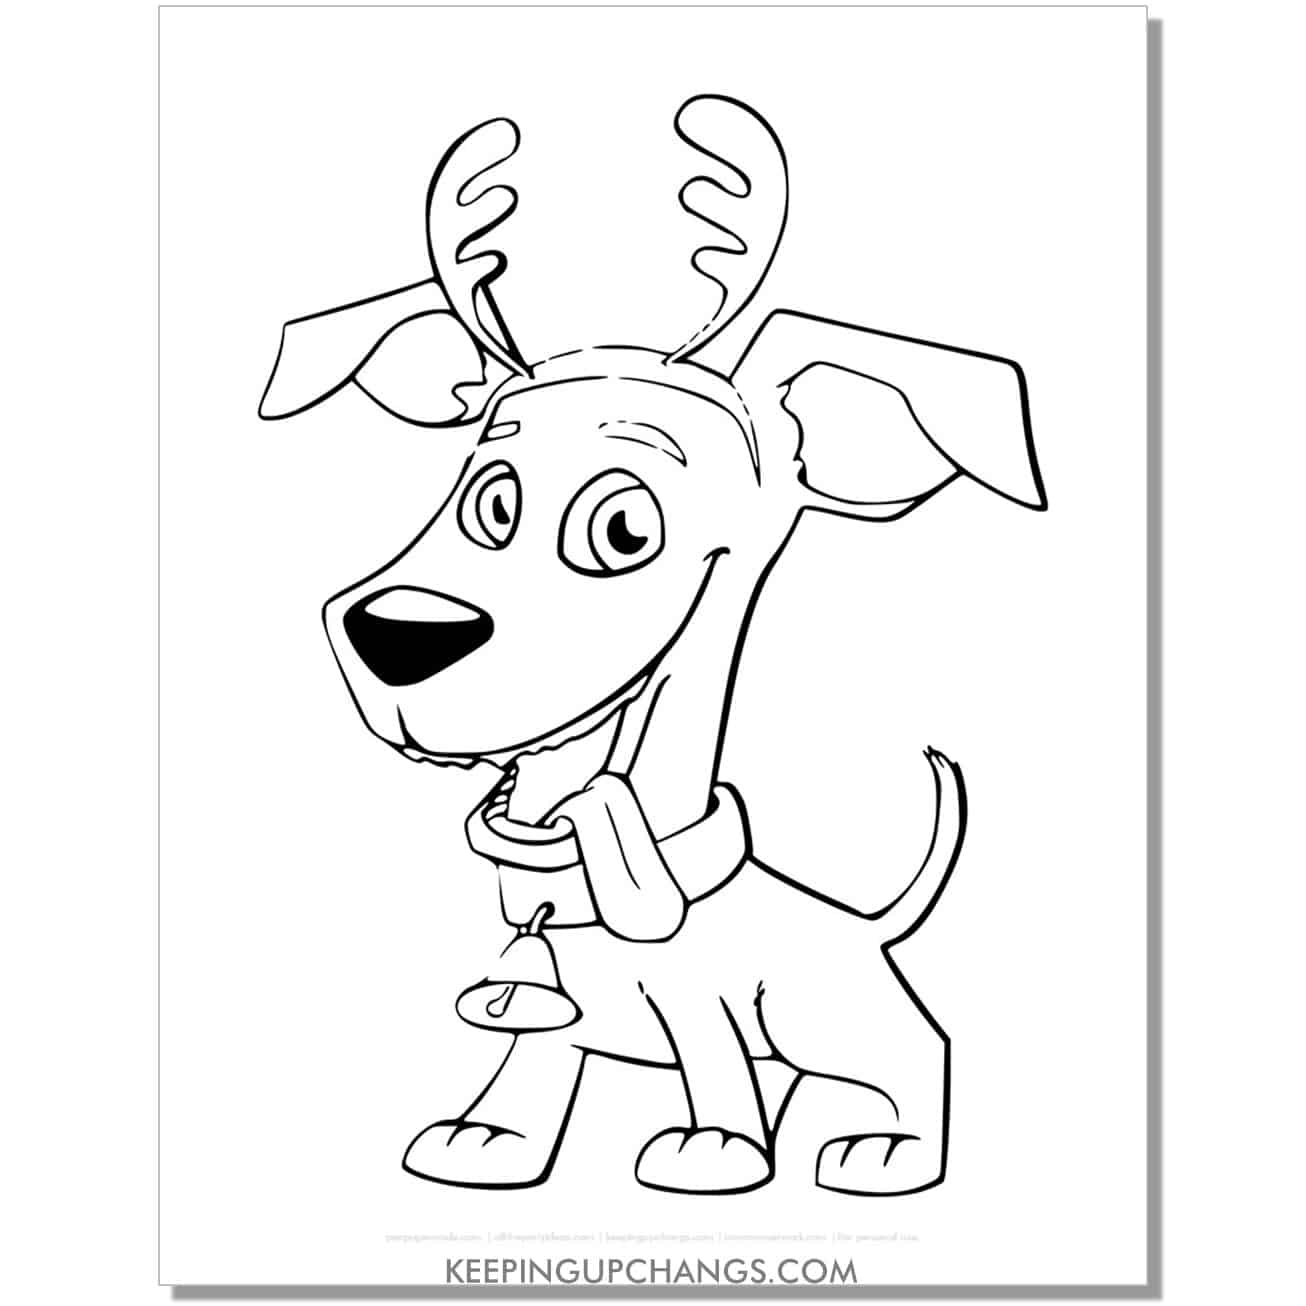 free christmas dog with reindeer antlers coloring page.